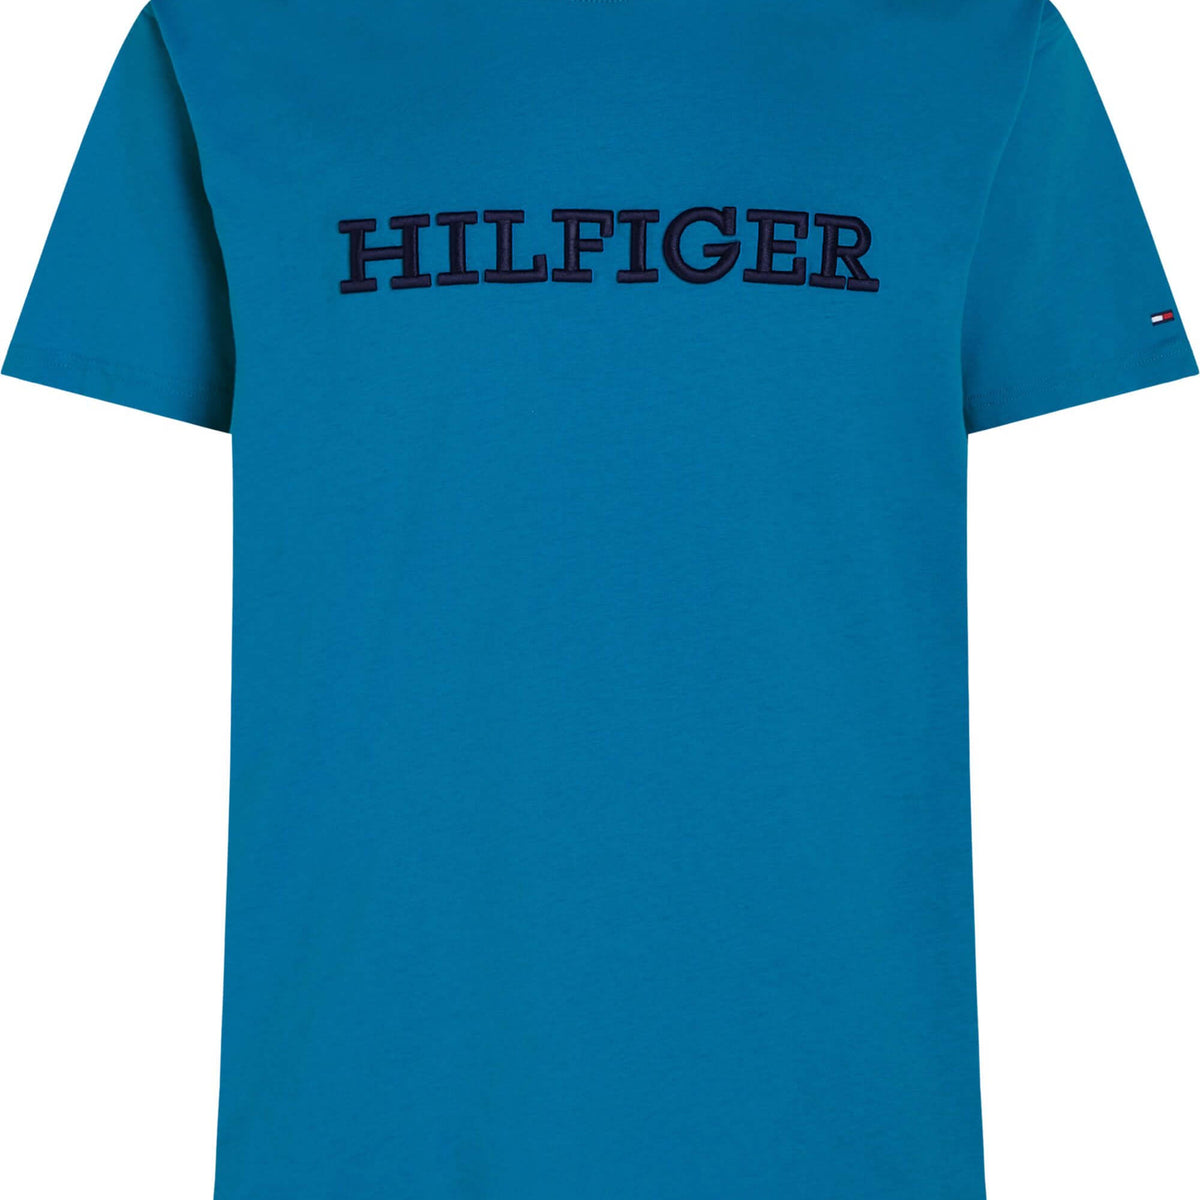 Hilfiger Tommy Monotype T-Shirt Aqua Embroidered